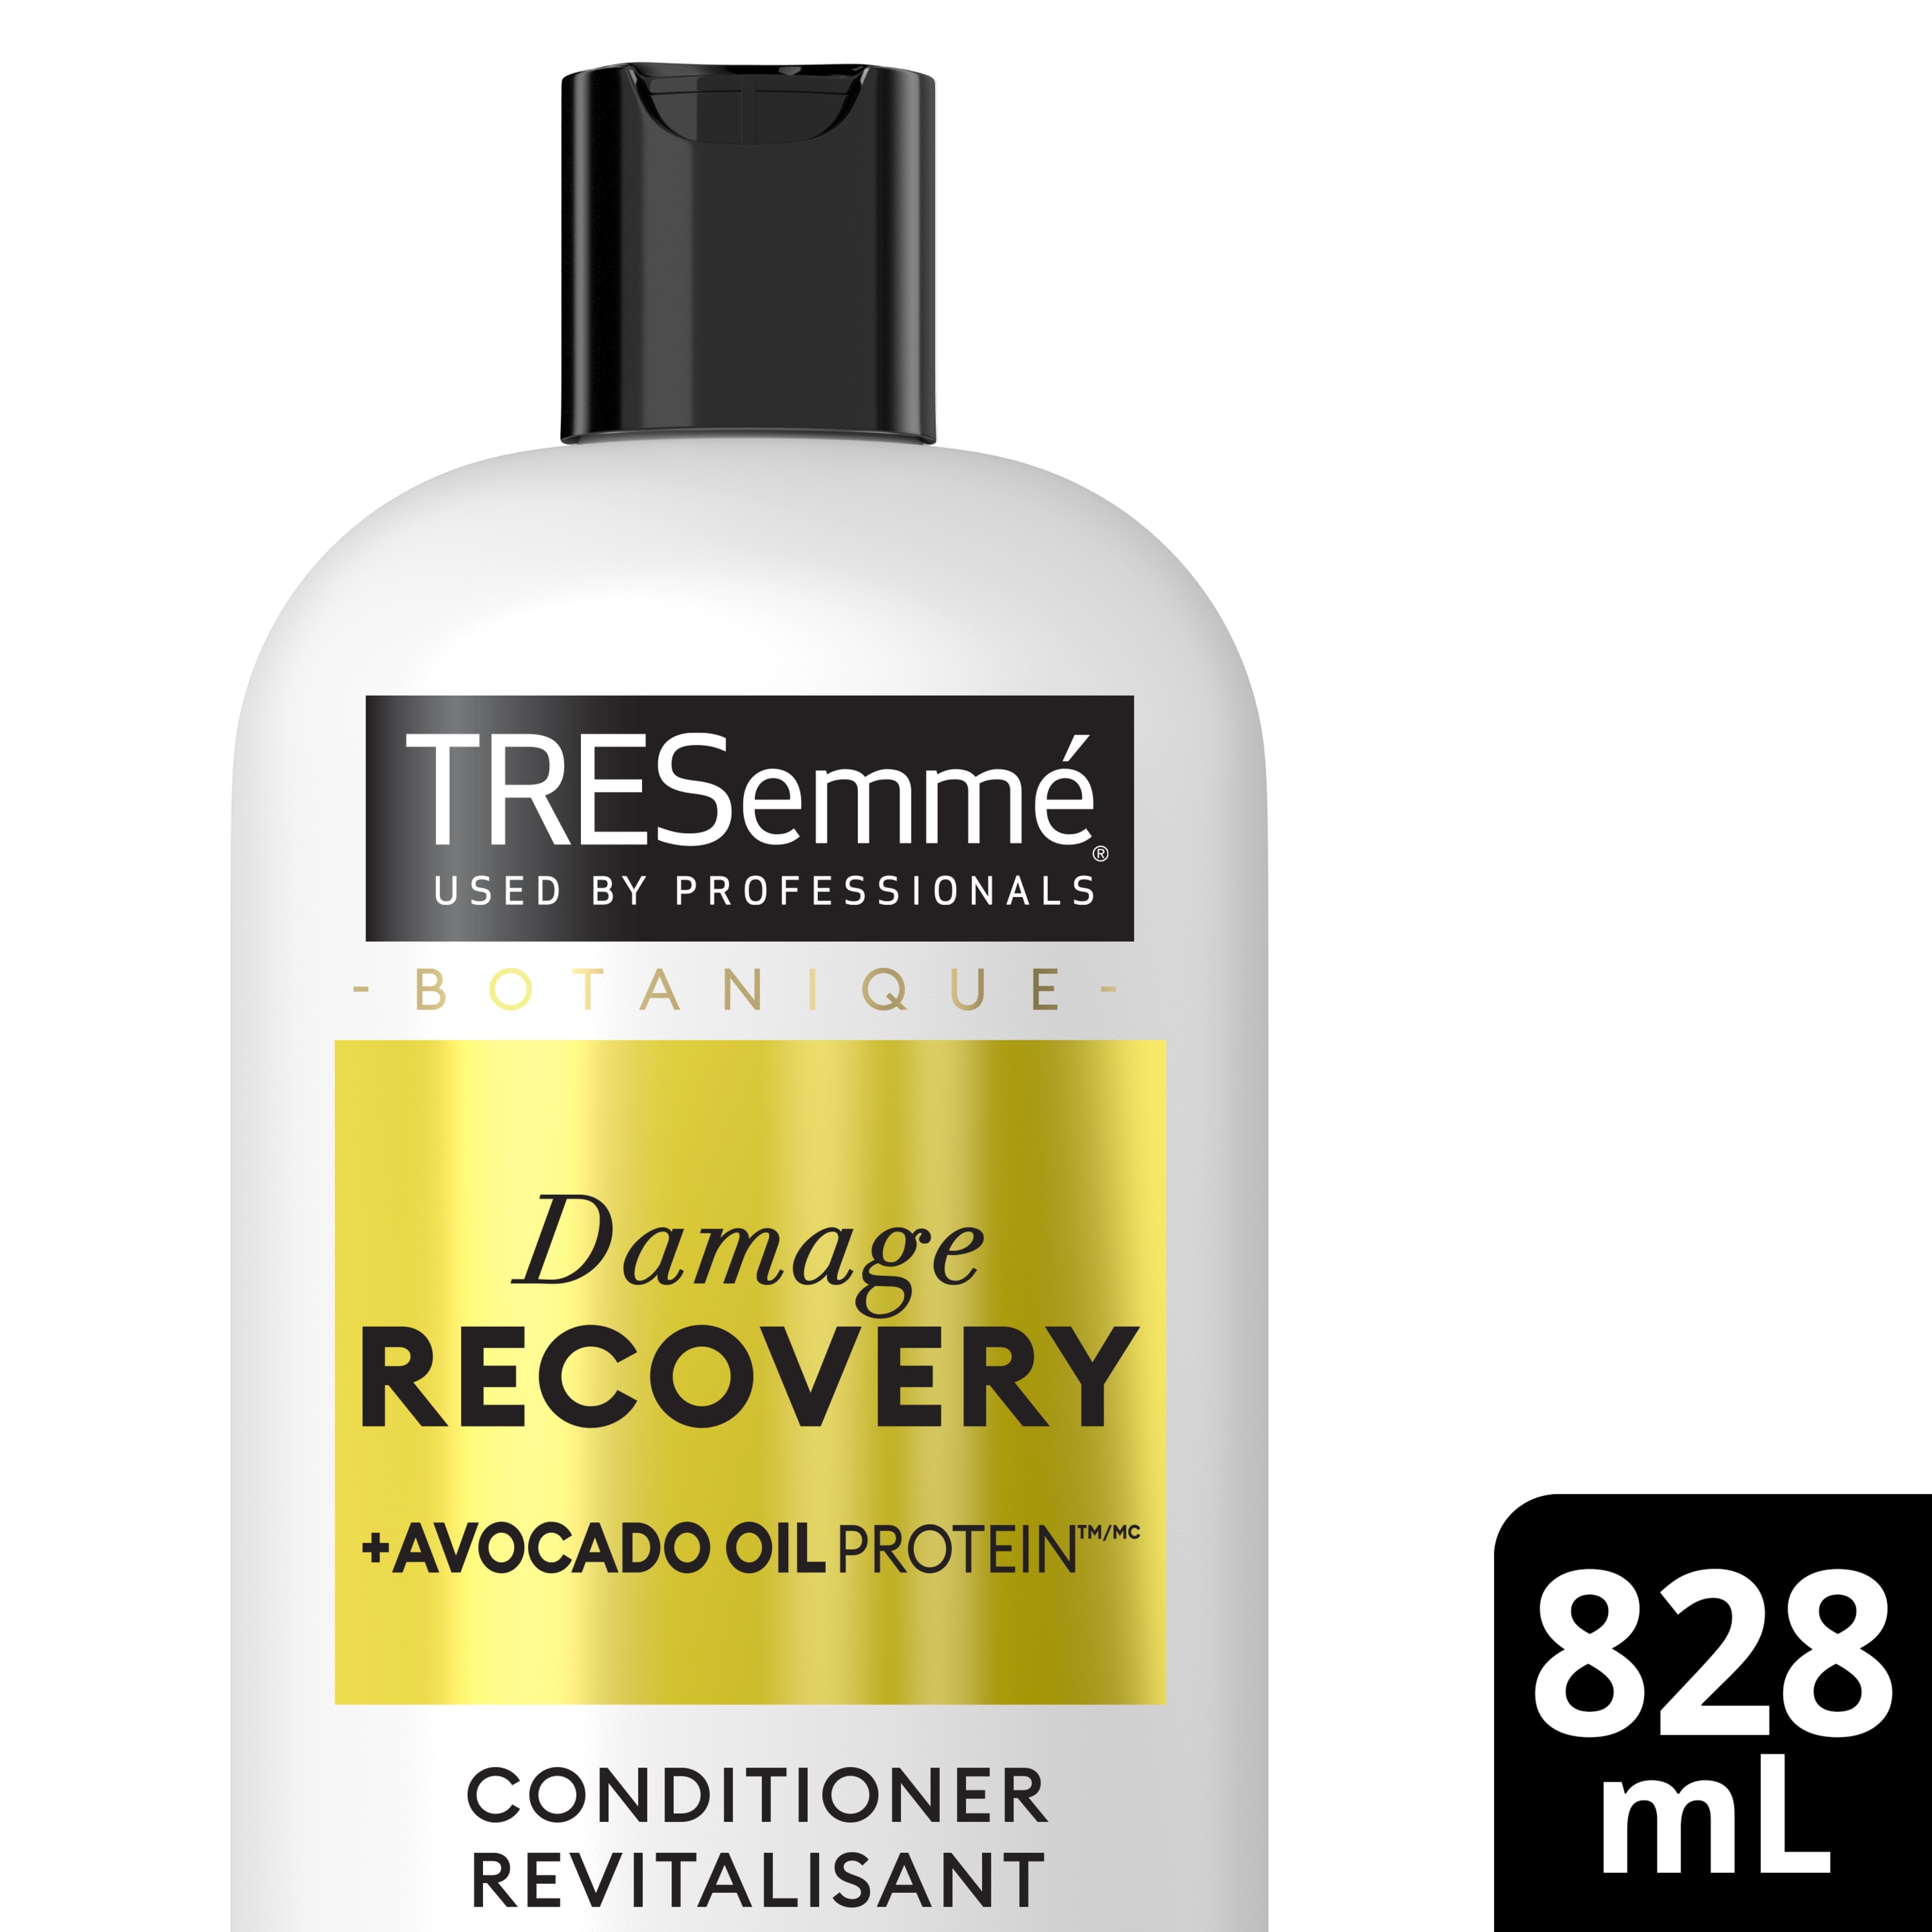 TRESemmé Botanique Damage and Recovery Conditioner 828ml